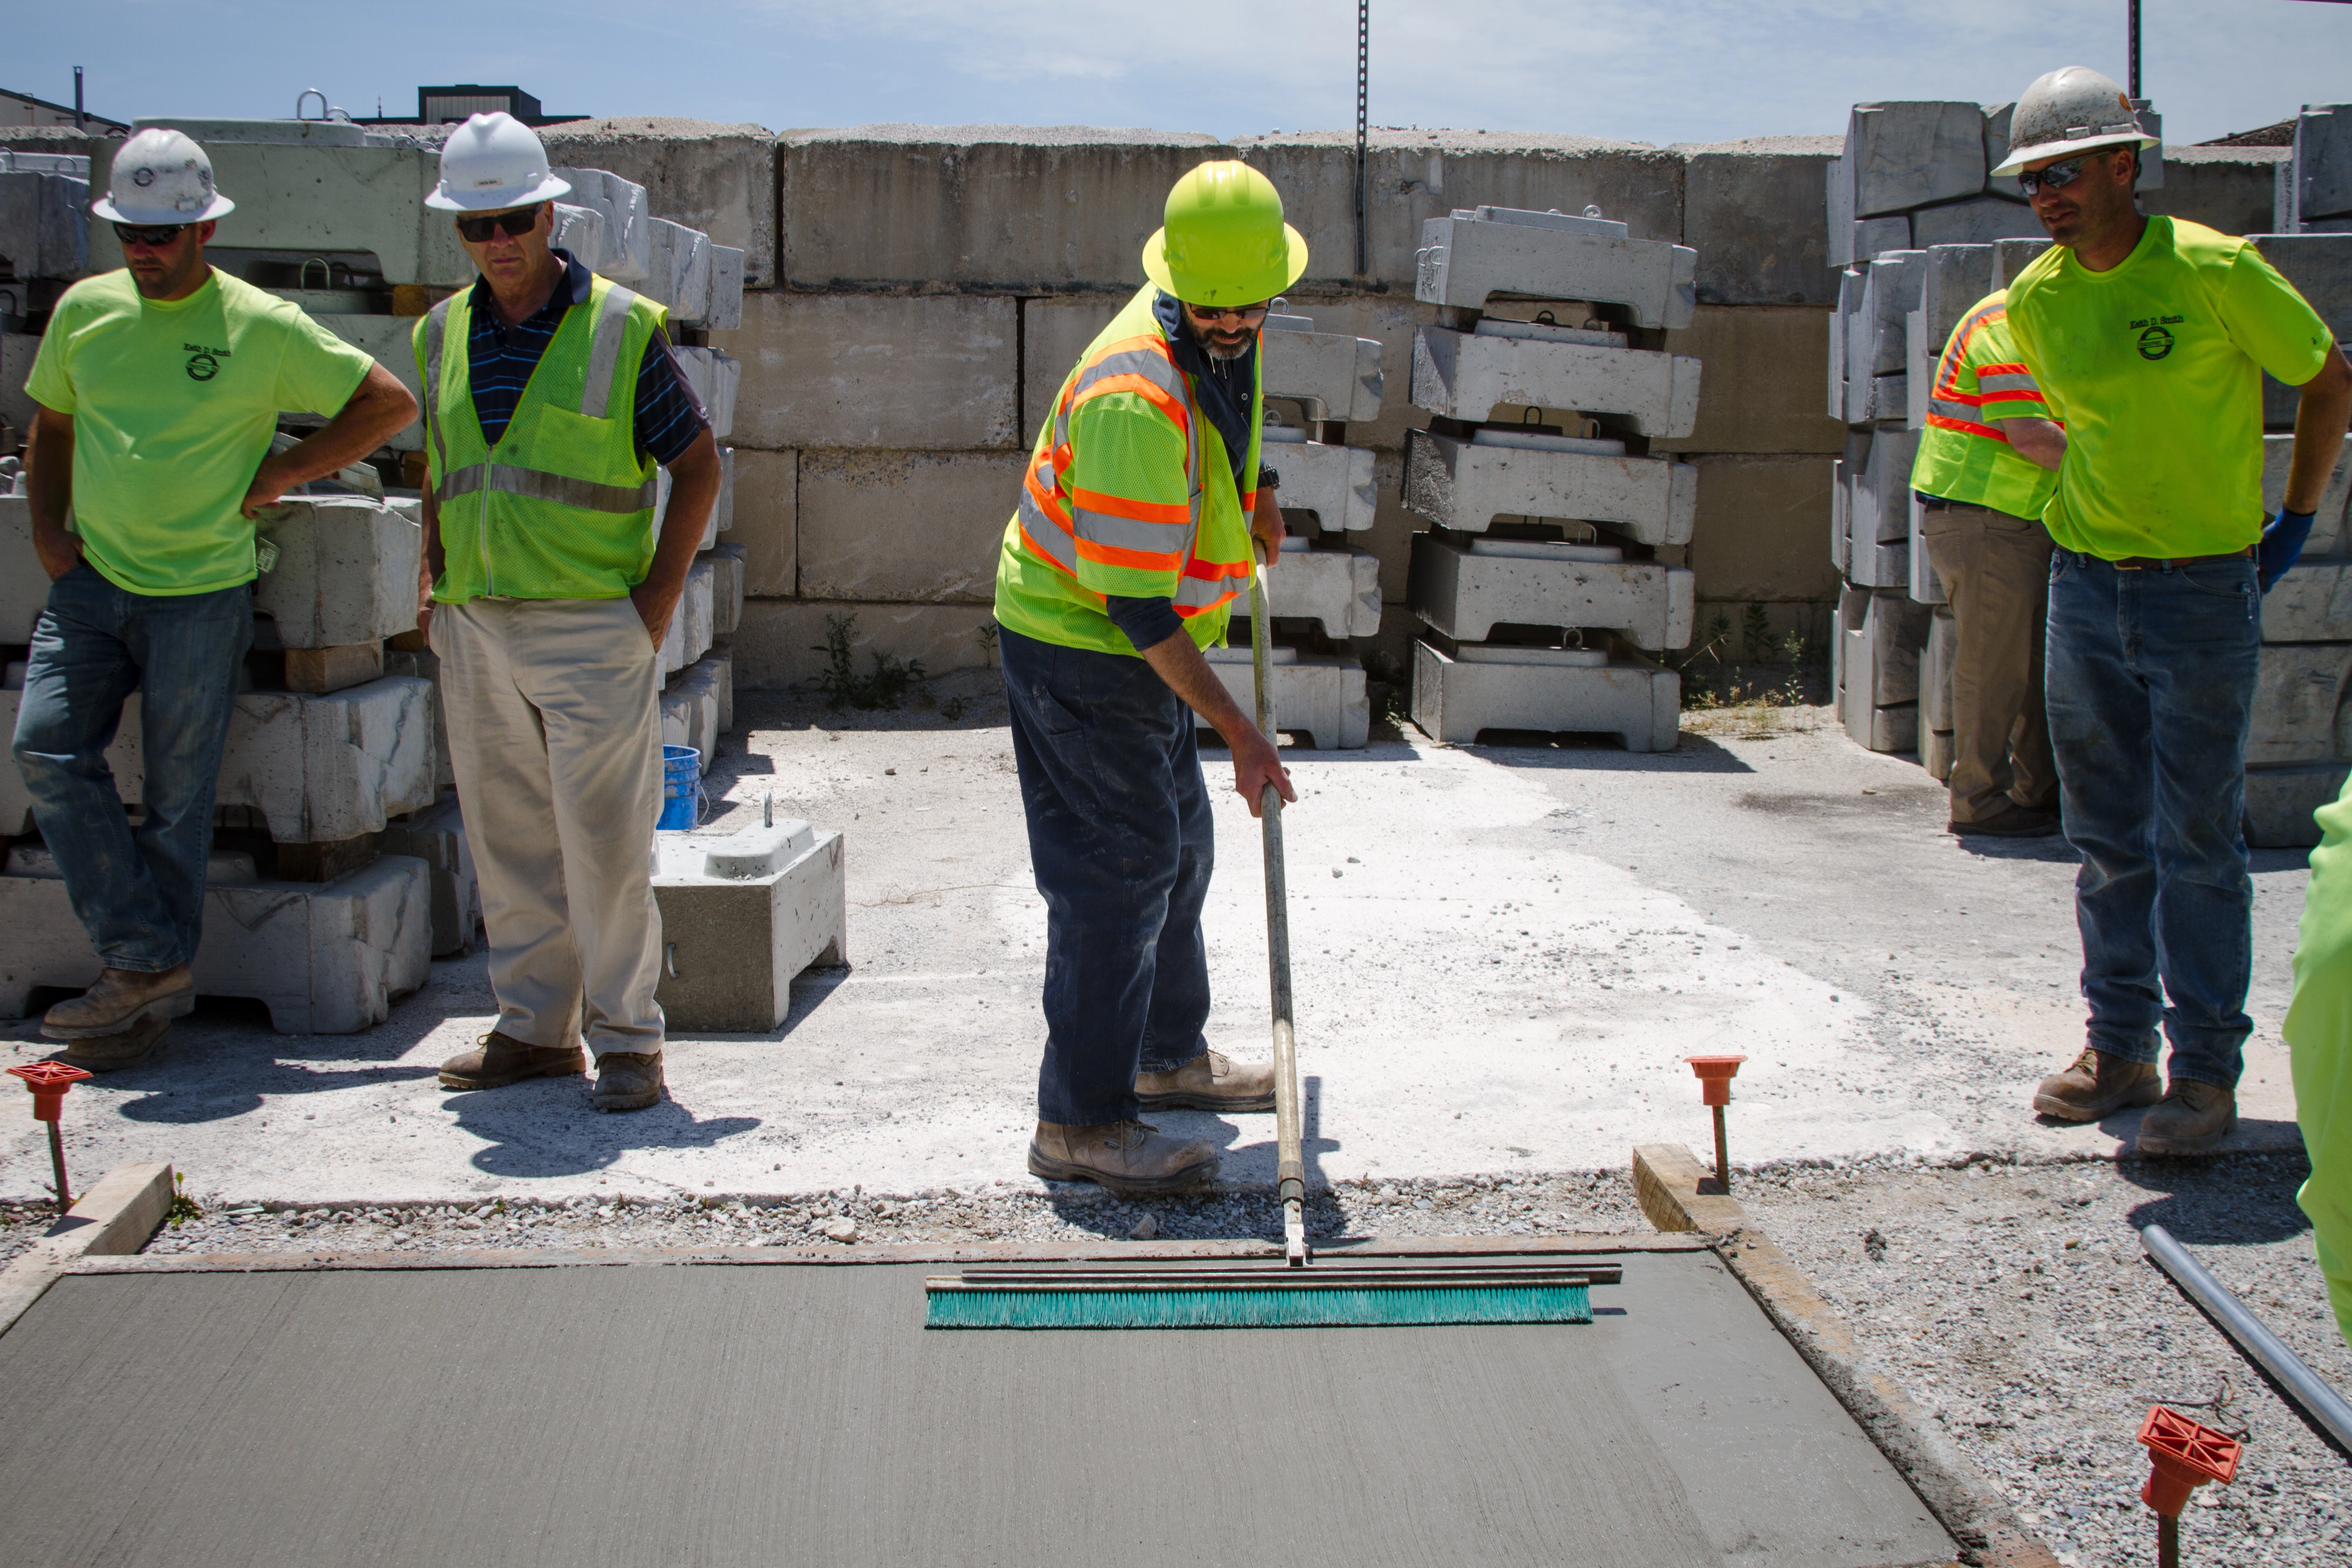 An image of Certified Concrete Finishers Course attendees standing in front of a simulated concrete pad practicing their finishing skills as part of the hands-on portion of the training.